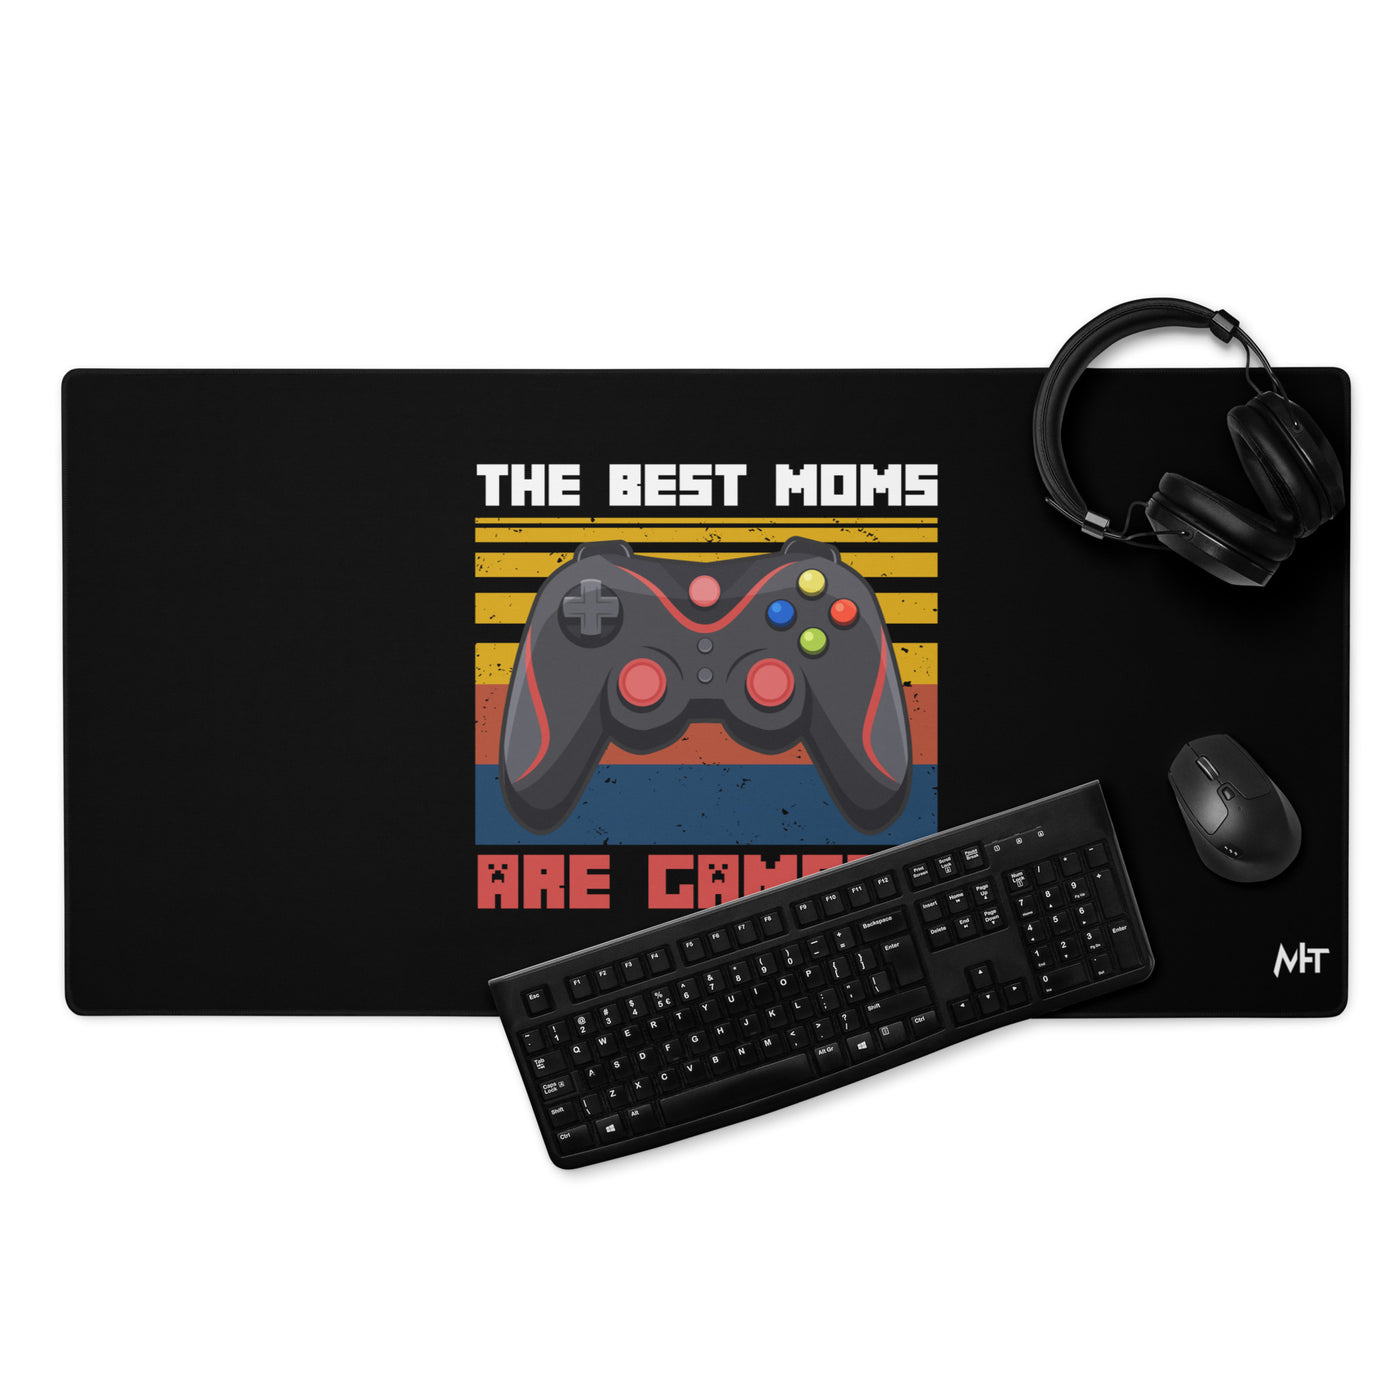 The best Moms are Gamers Desk Mat